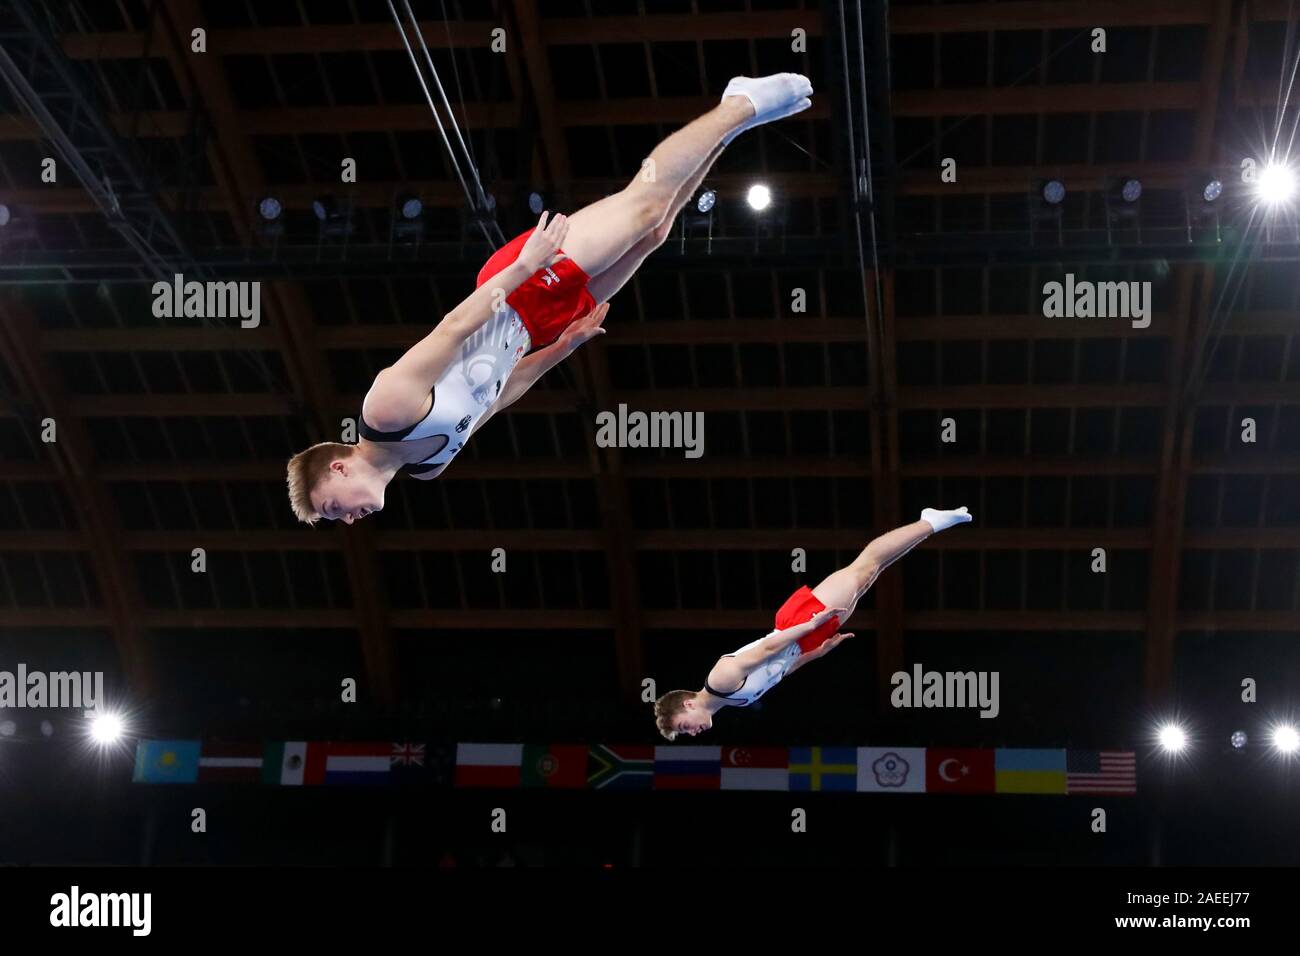 Tokyo, Japan. 8th Dec, 2019. budde & Caio Lauxtermann (GER), December 8, 2019 - Trampoline : 27th FIG Trampoline Gymnastics World Age Group Competitions, Men's Synchronised Trampoline (ages of 17-21) Final at Ariake Gymnastics Centre in Tokyo, Japan. Credit: Naoki Nishimura/AFLO SPORT/Alamy Live News Stock Photo